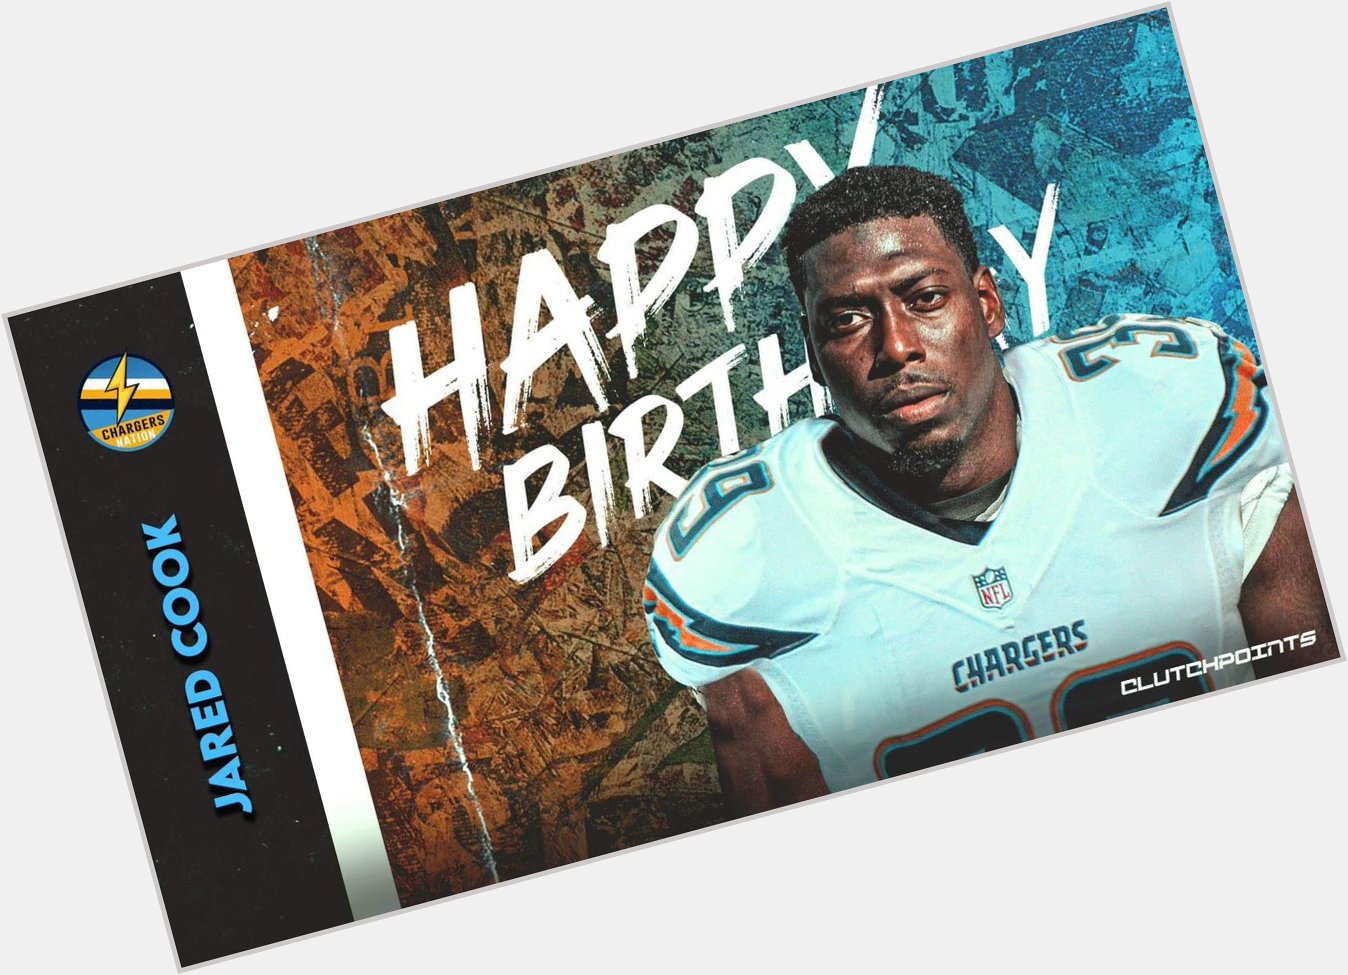 Let\s all wish a happy 34th birthday to our new TE Jared Cook! 